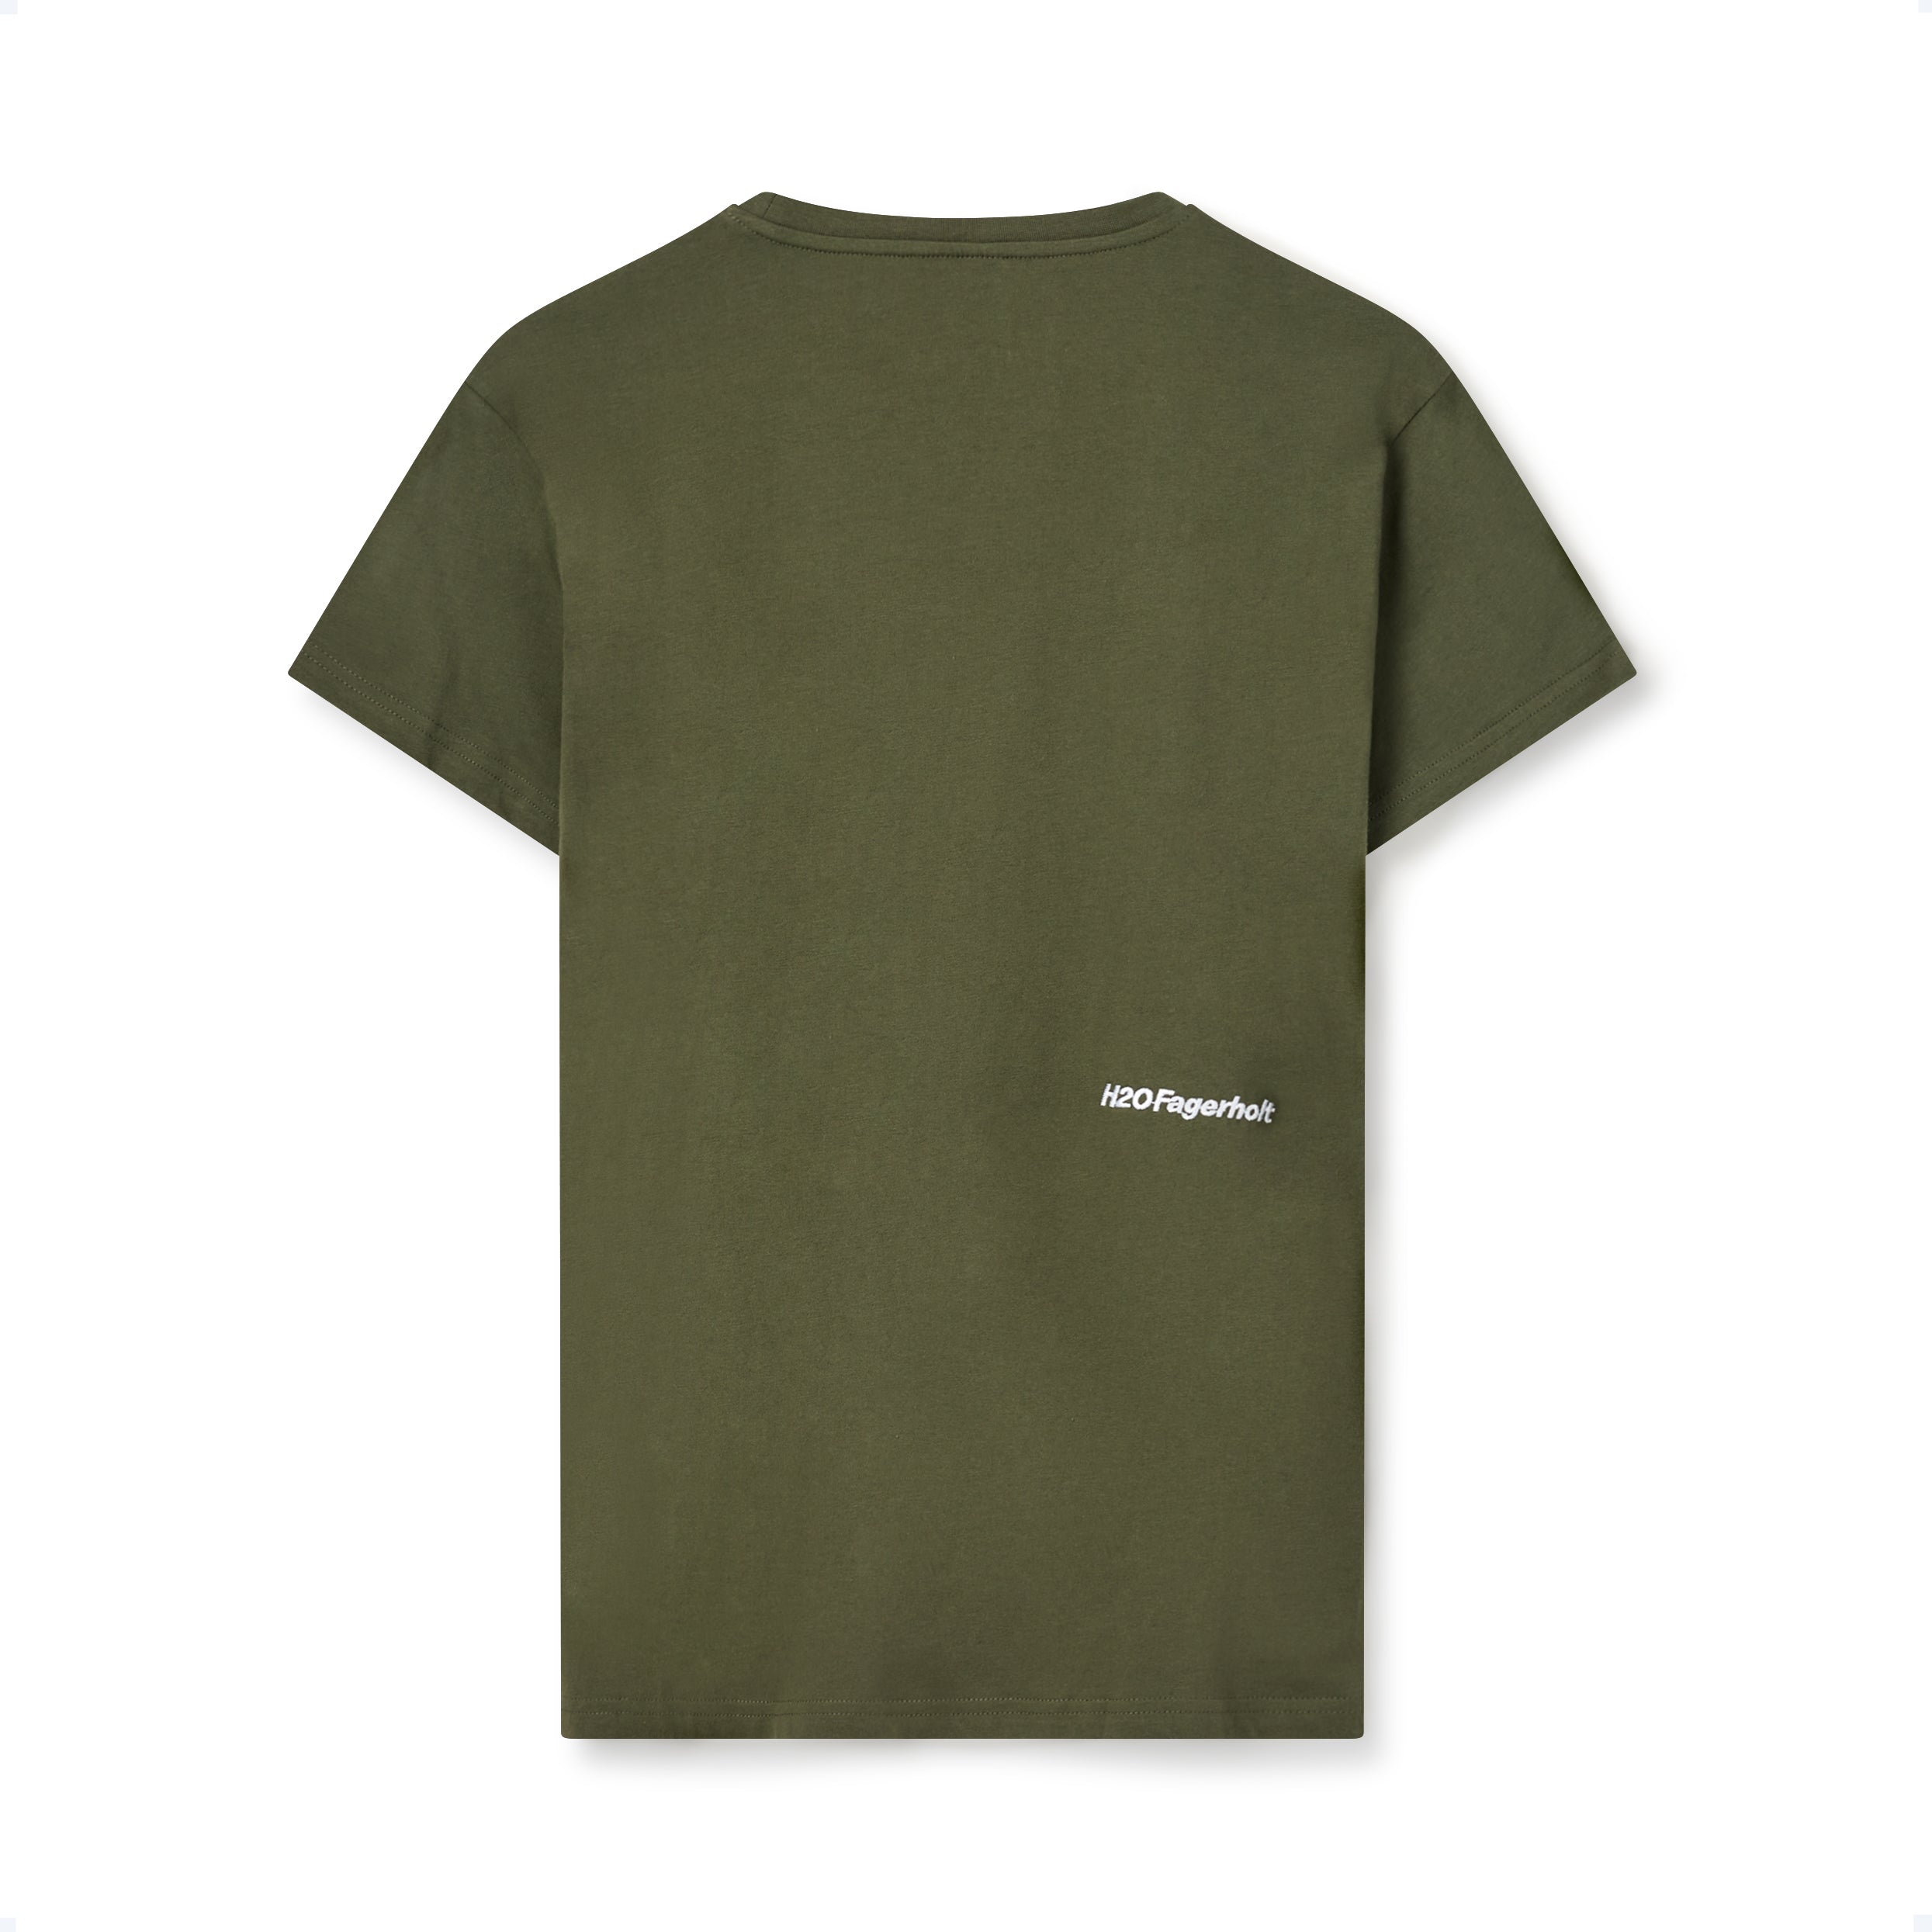 The Tee - Forest Green